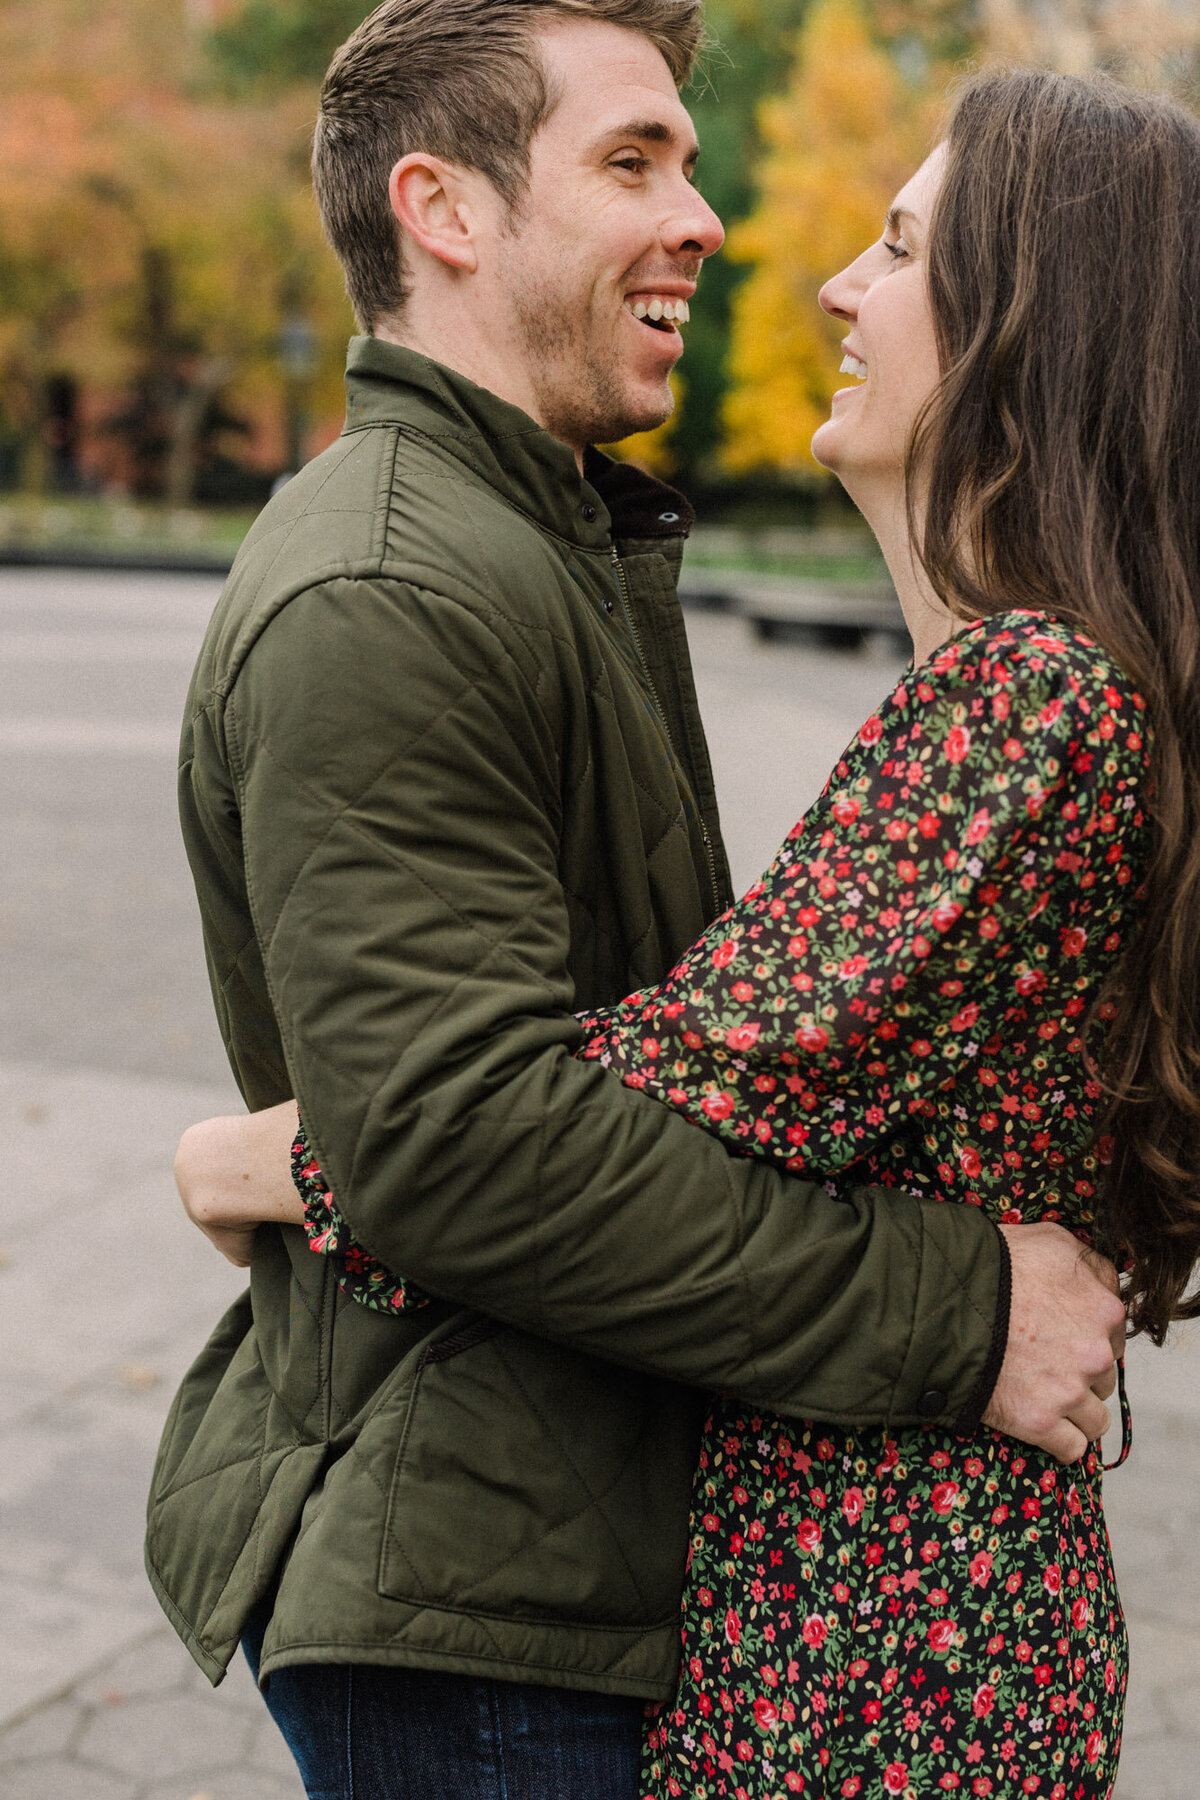 A NYC engagement session